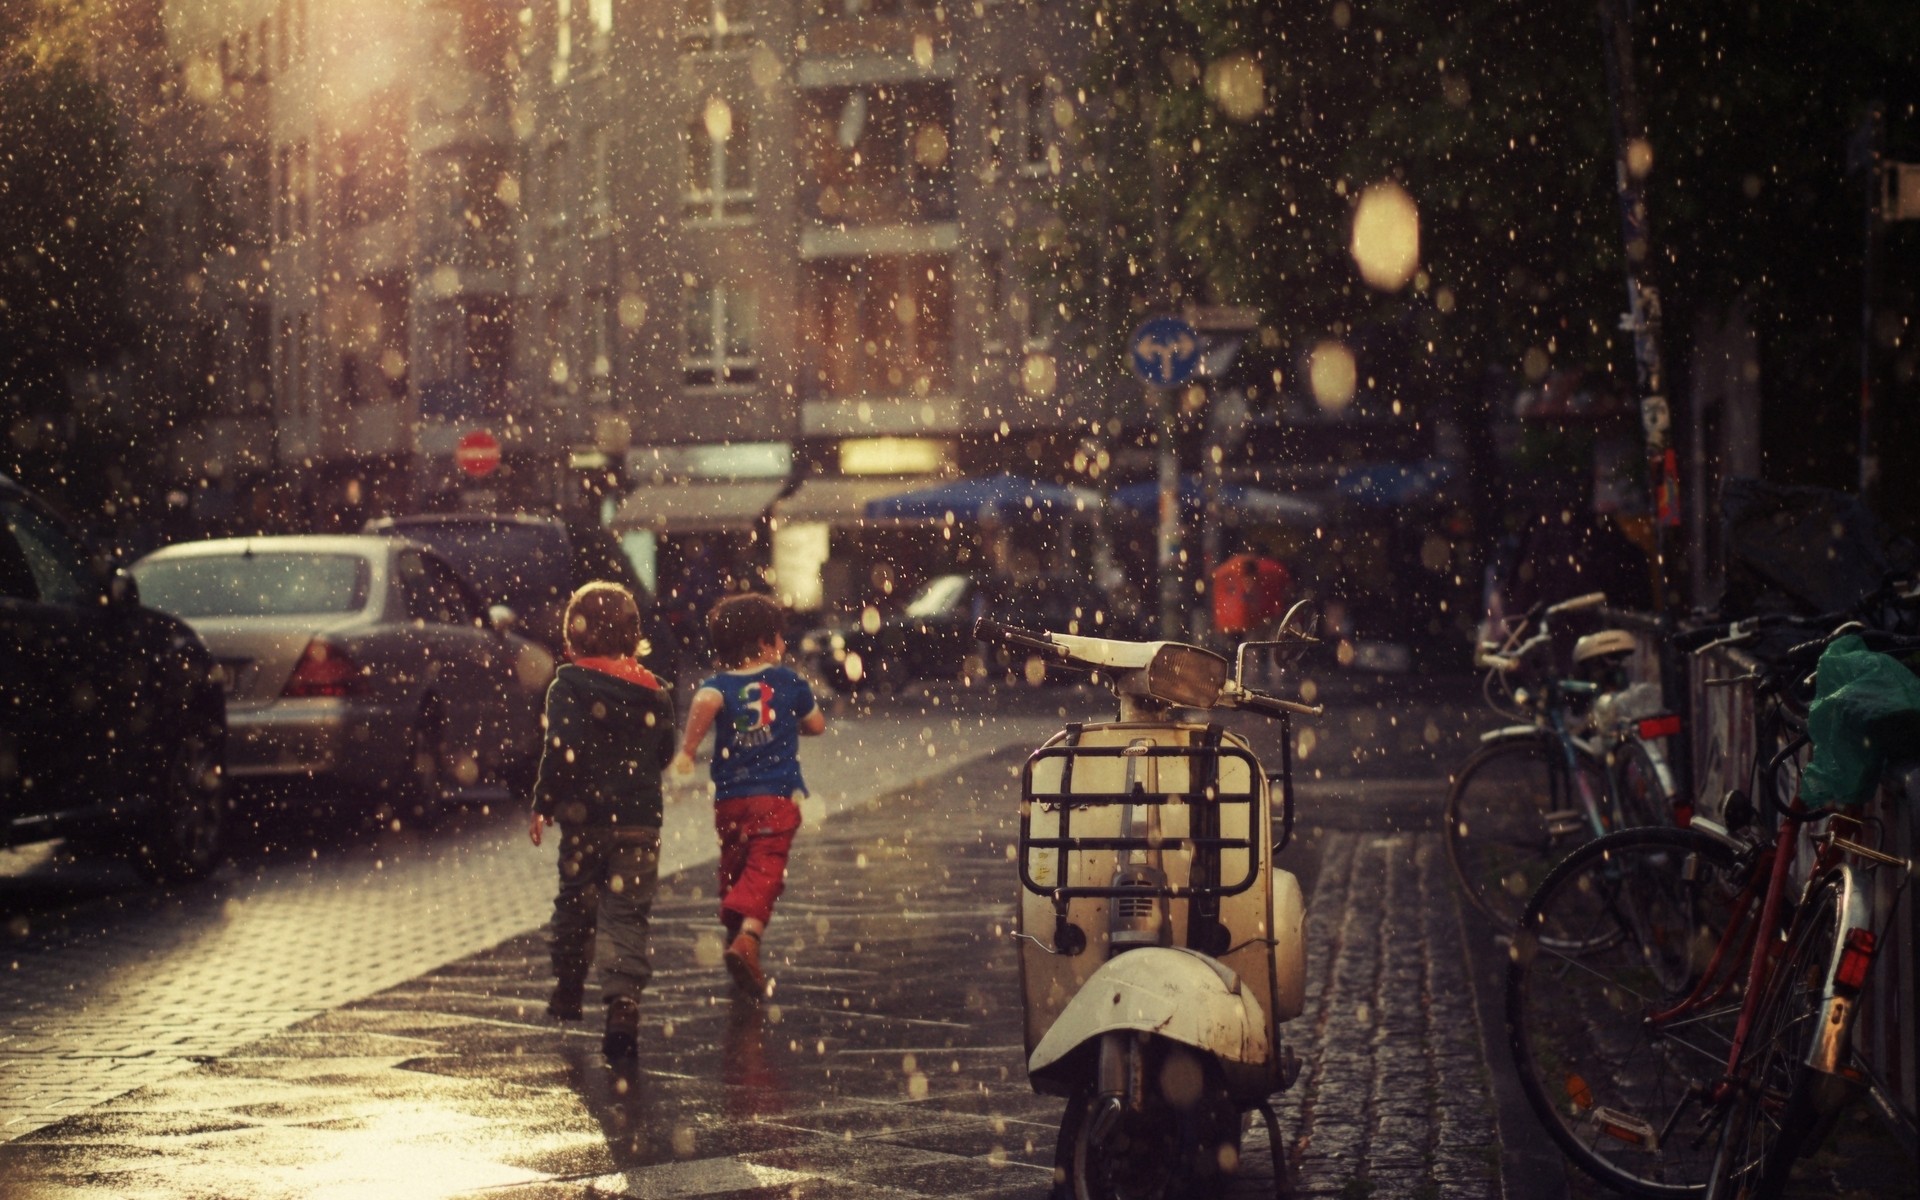 snow, Cityscapes, Streets, Cars, Home, Motorbikes, Children Wallpaper